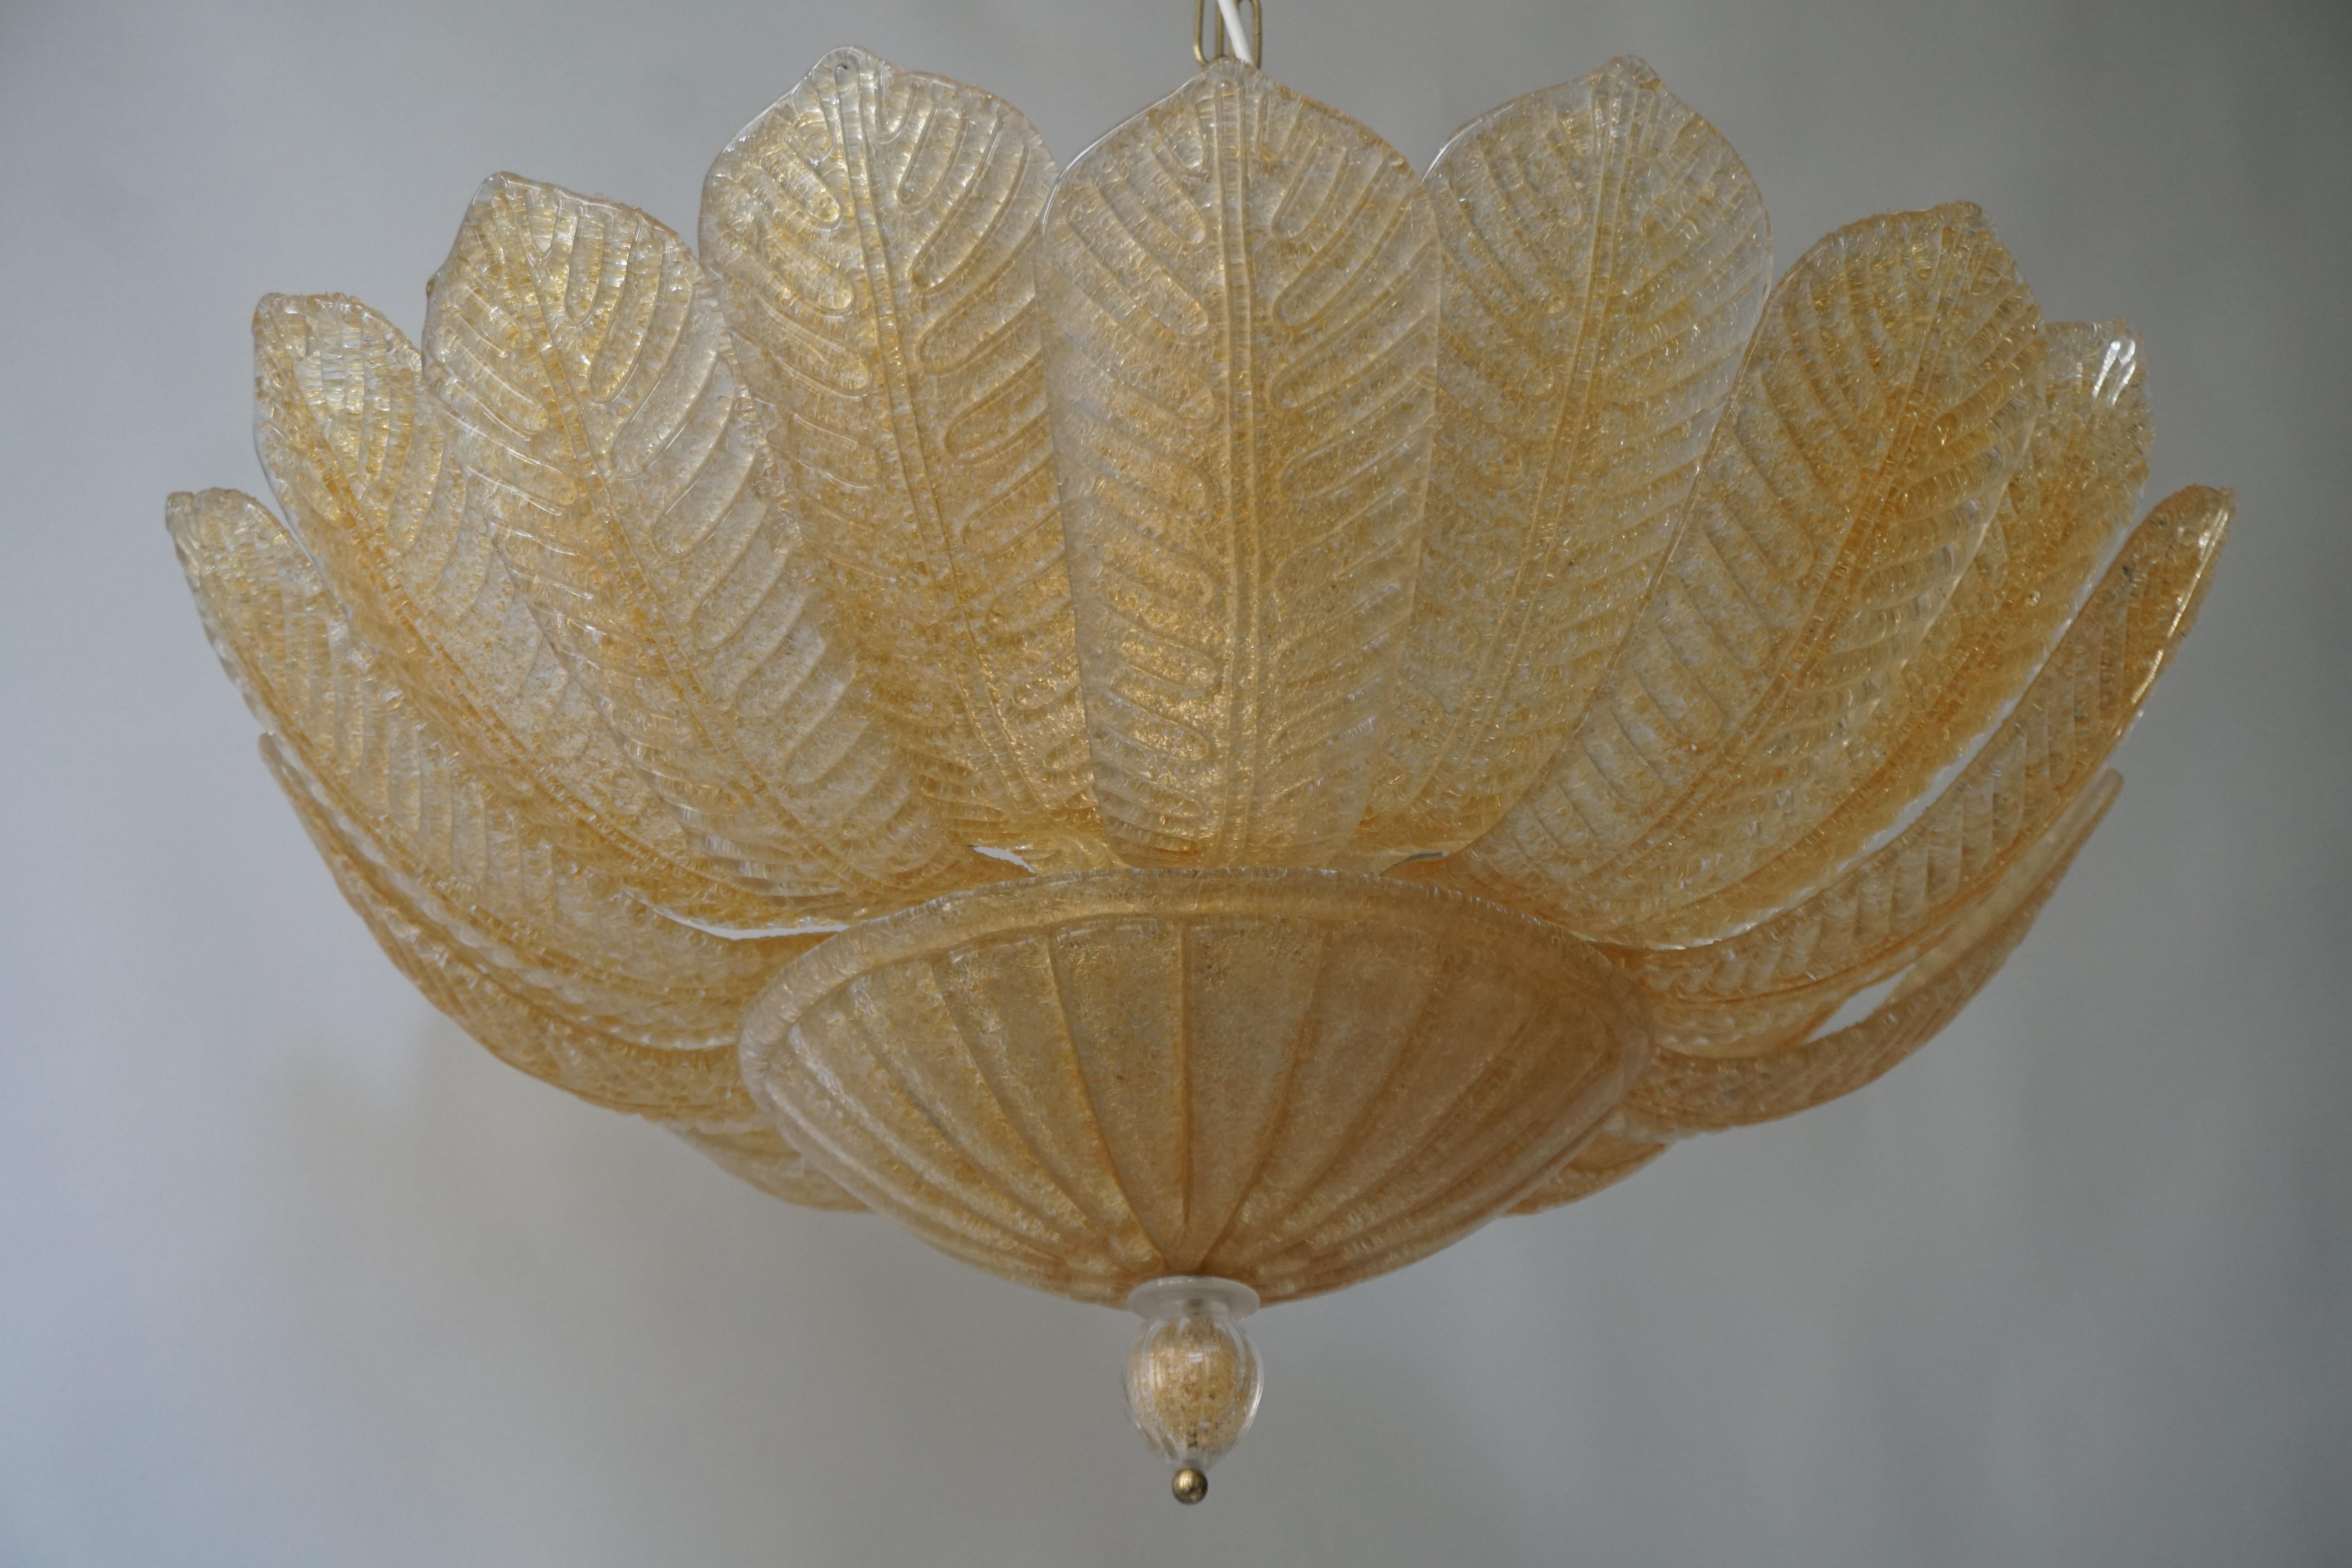 Brass Barovier Toso Style Italian Gold Textured Murano Glass Flower Leaf Flushmount For Sale